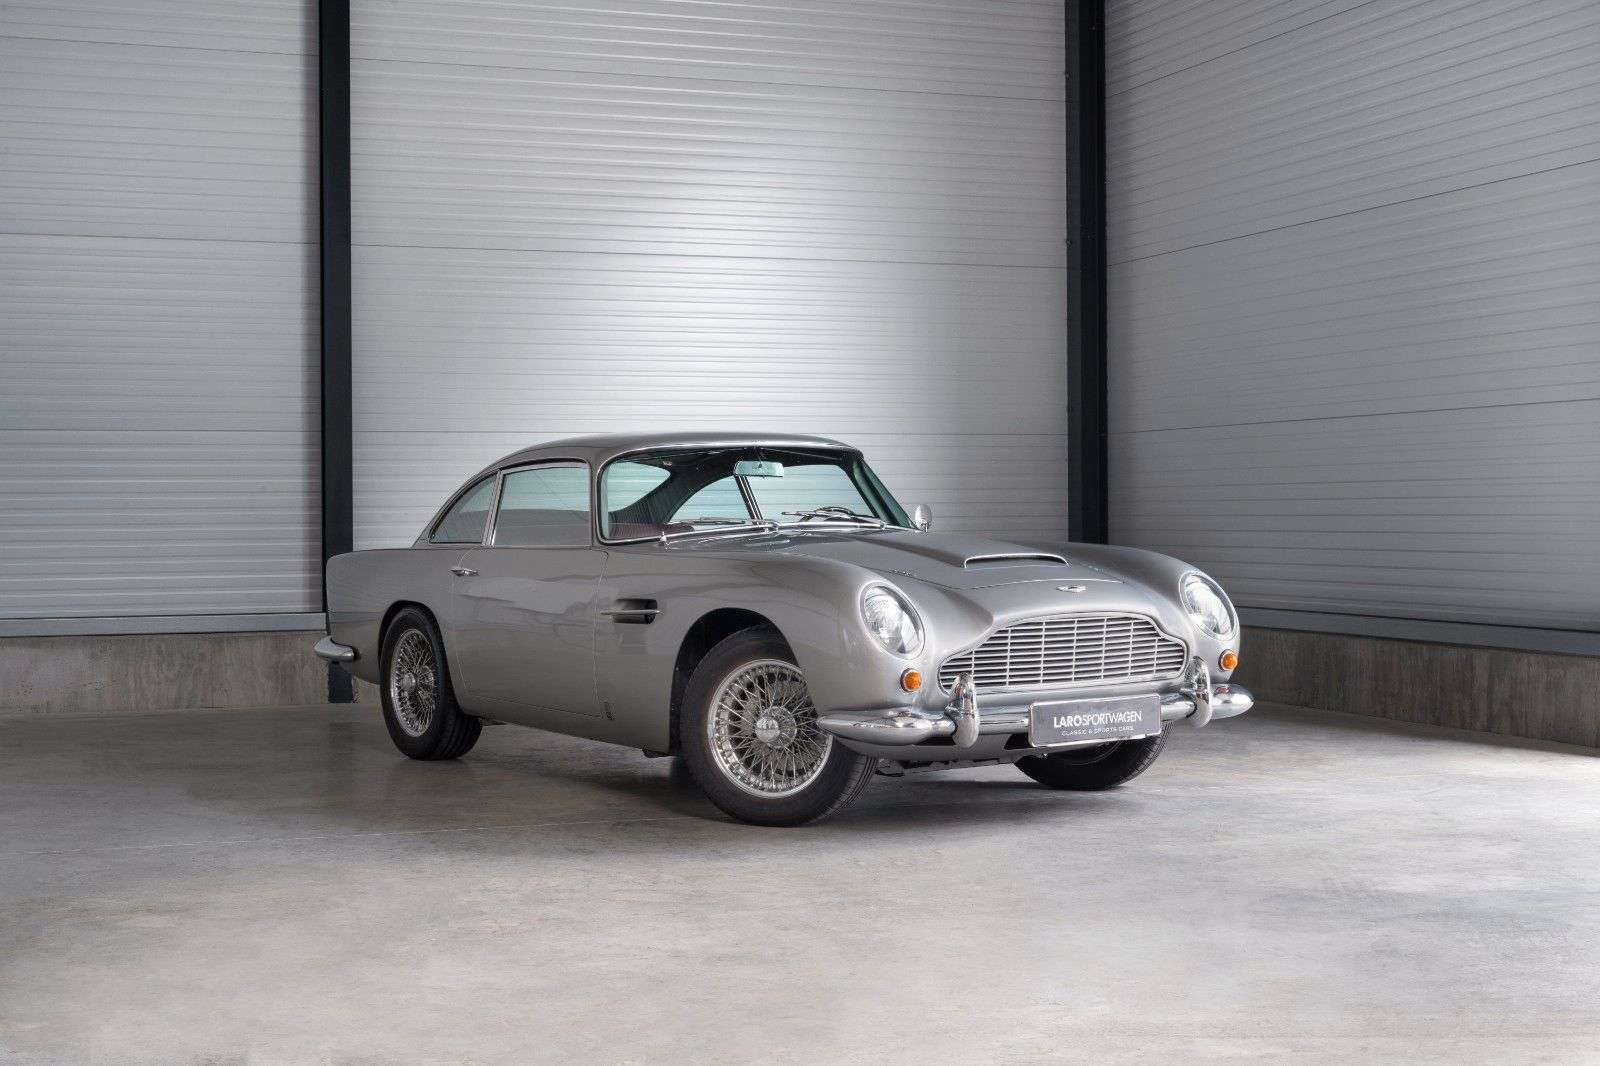 Aston Martin DB Coupe in Grey antique / classic in Weitersburg for € 879,000.-